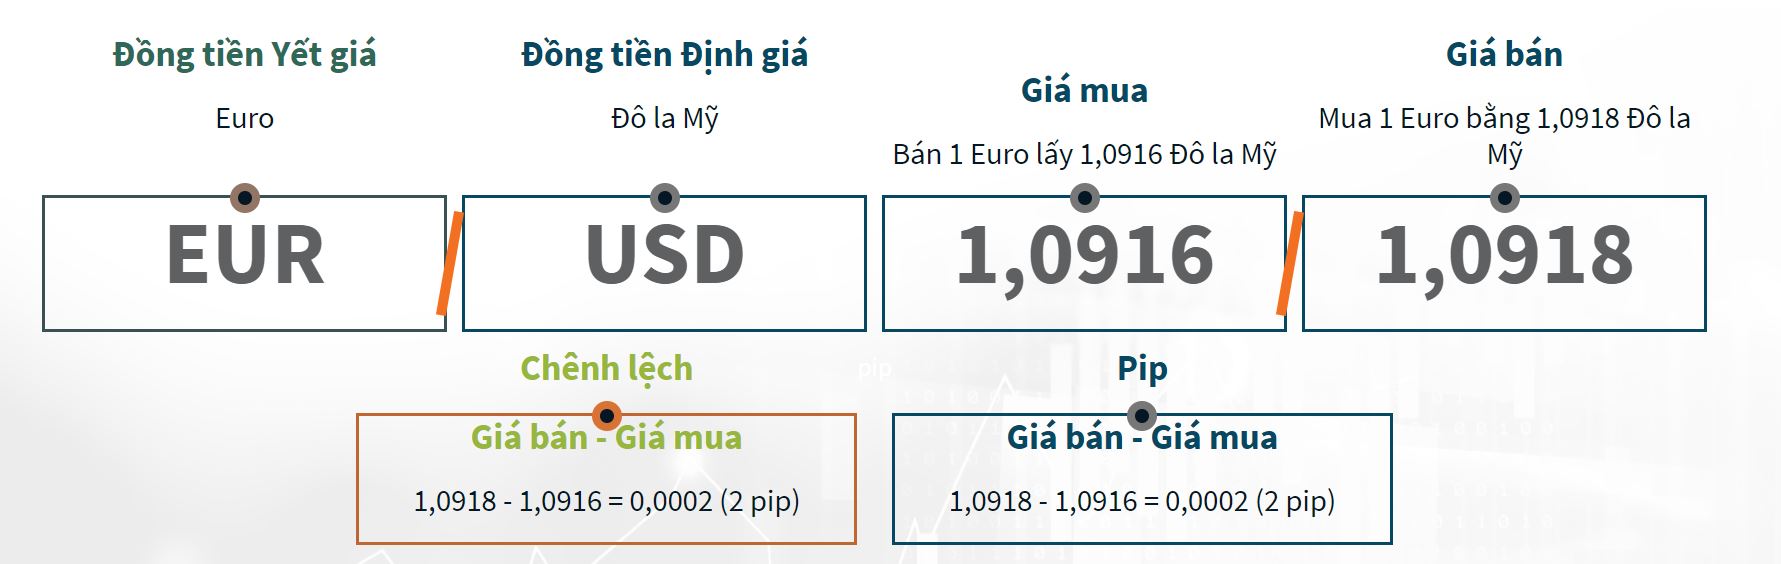 Giao dich Forex